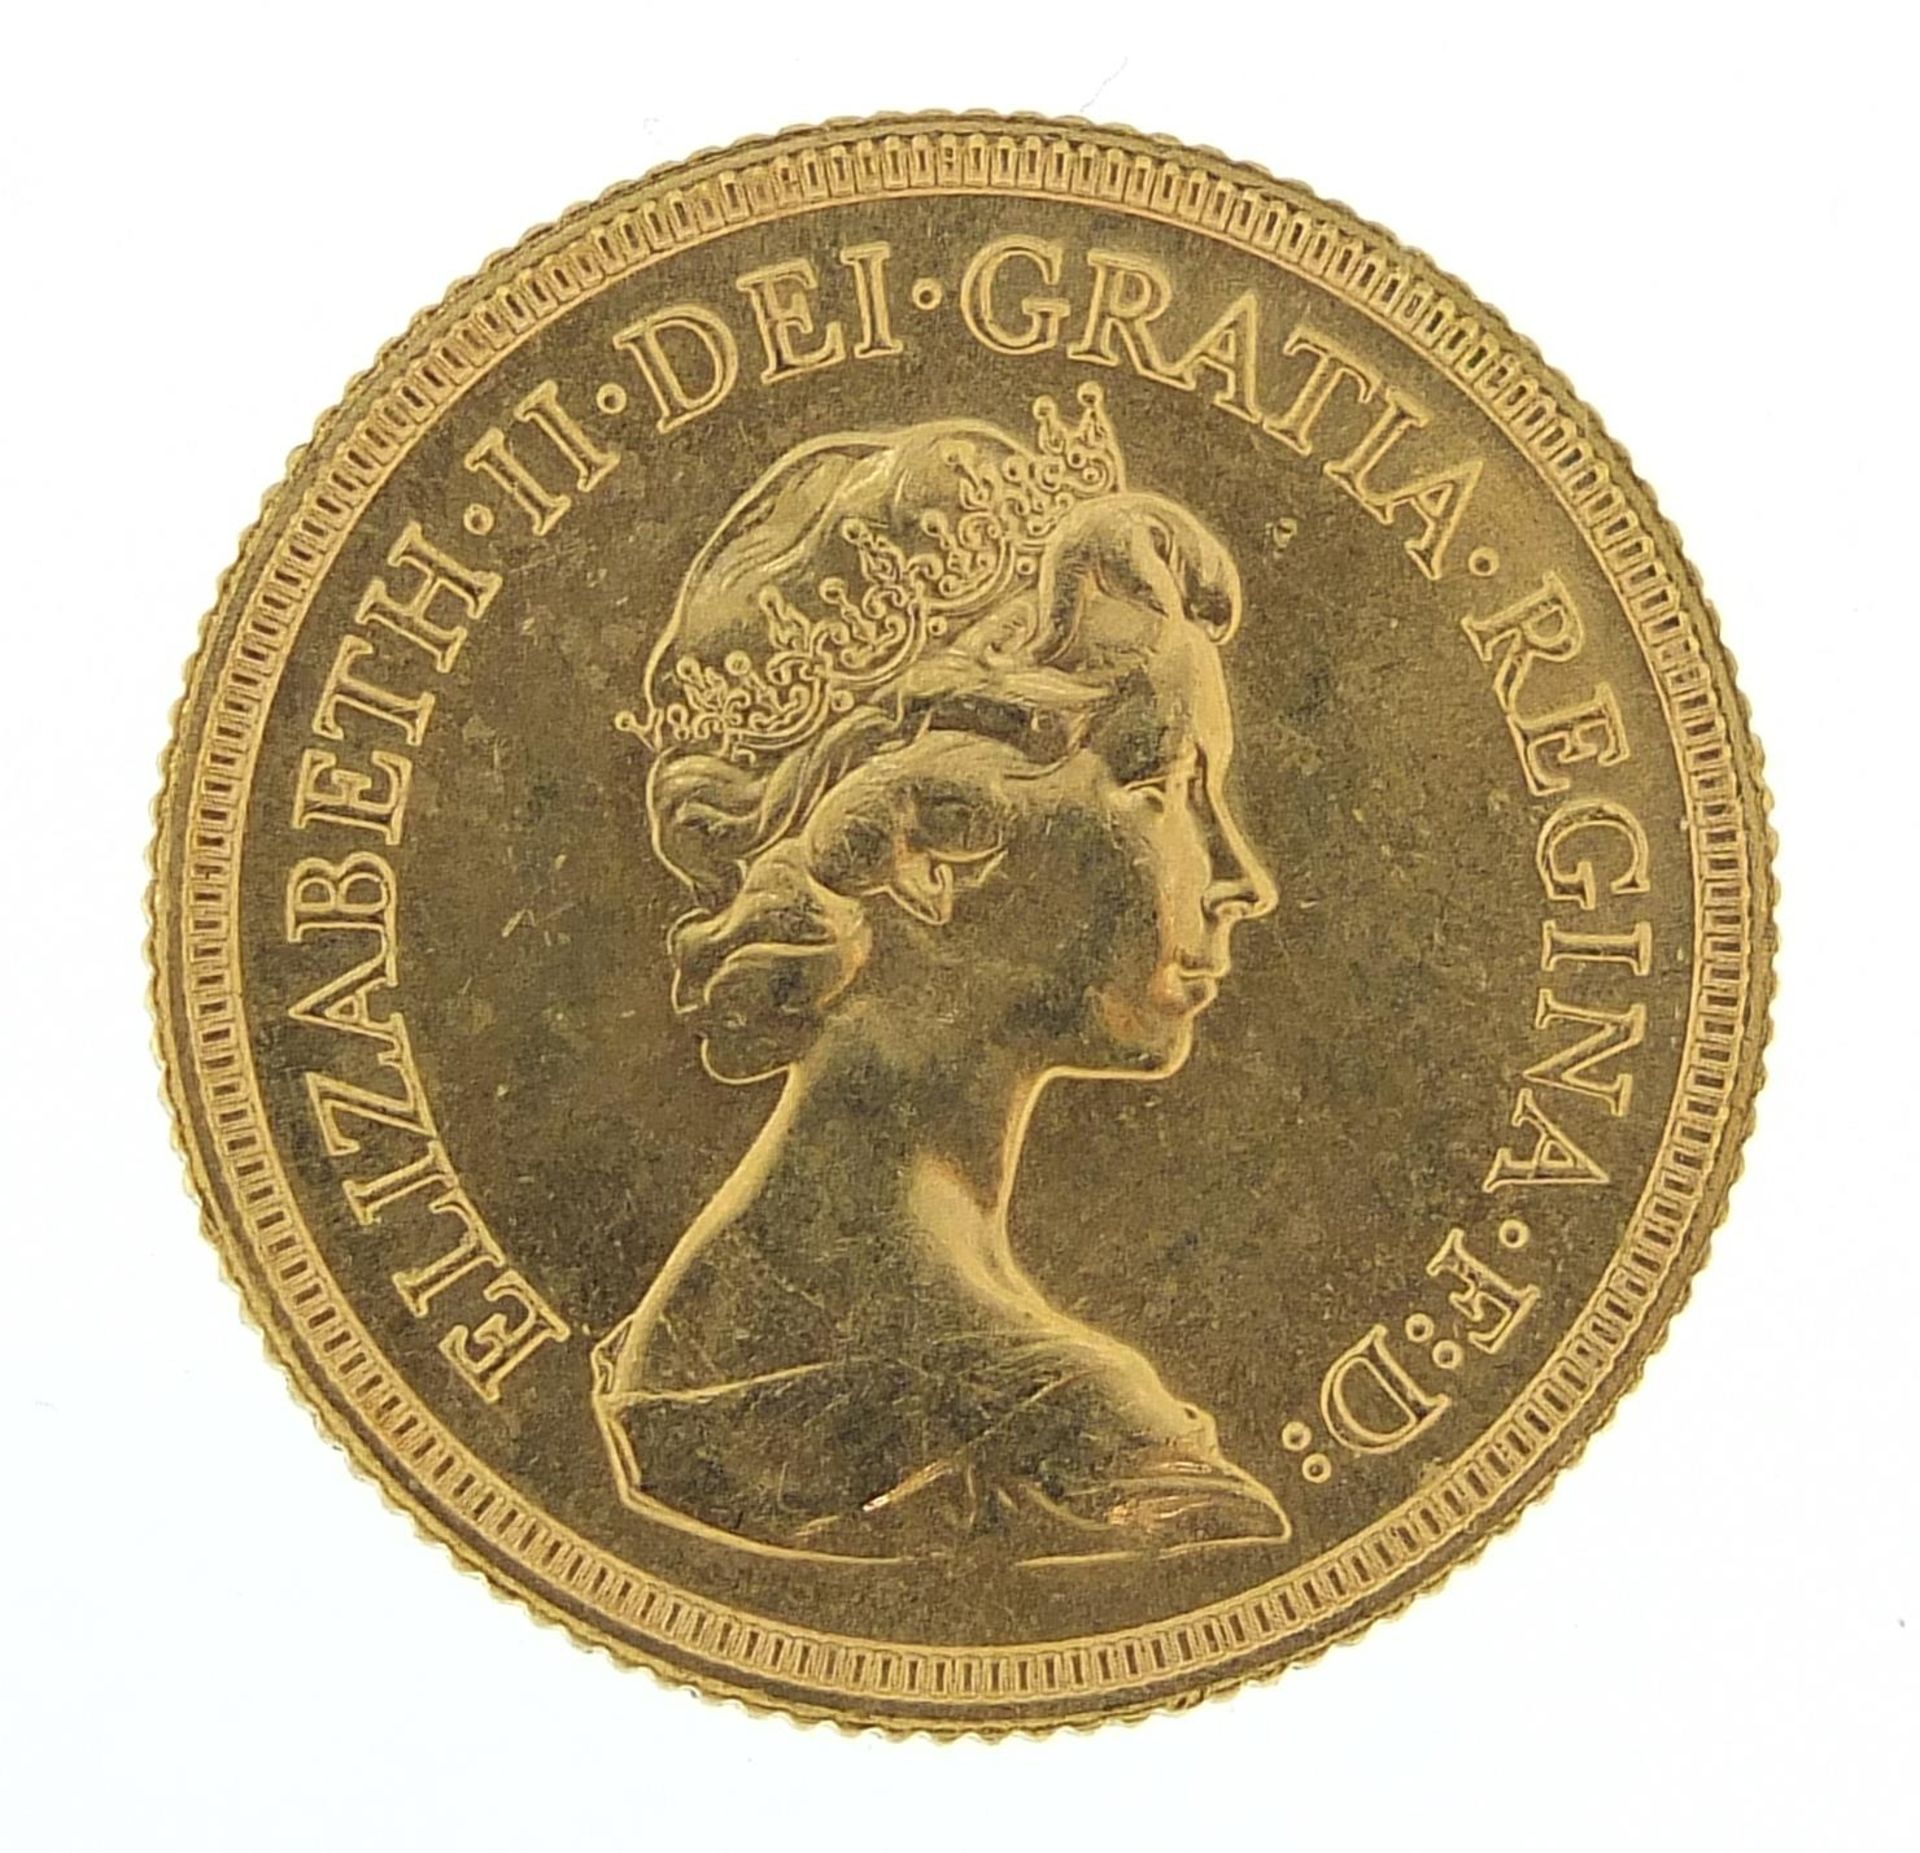 Elizabeth II 1981 gold sovereign - this lot is sold without buyer's premium - Image 2 of 3